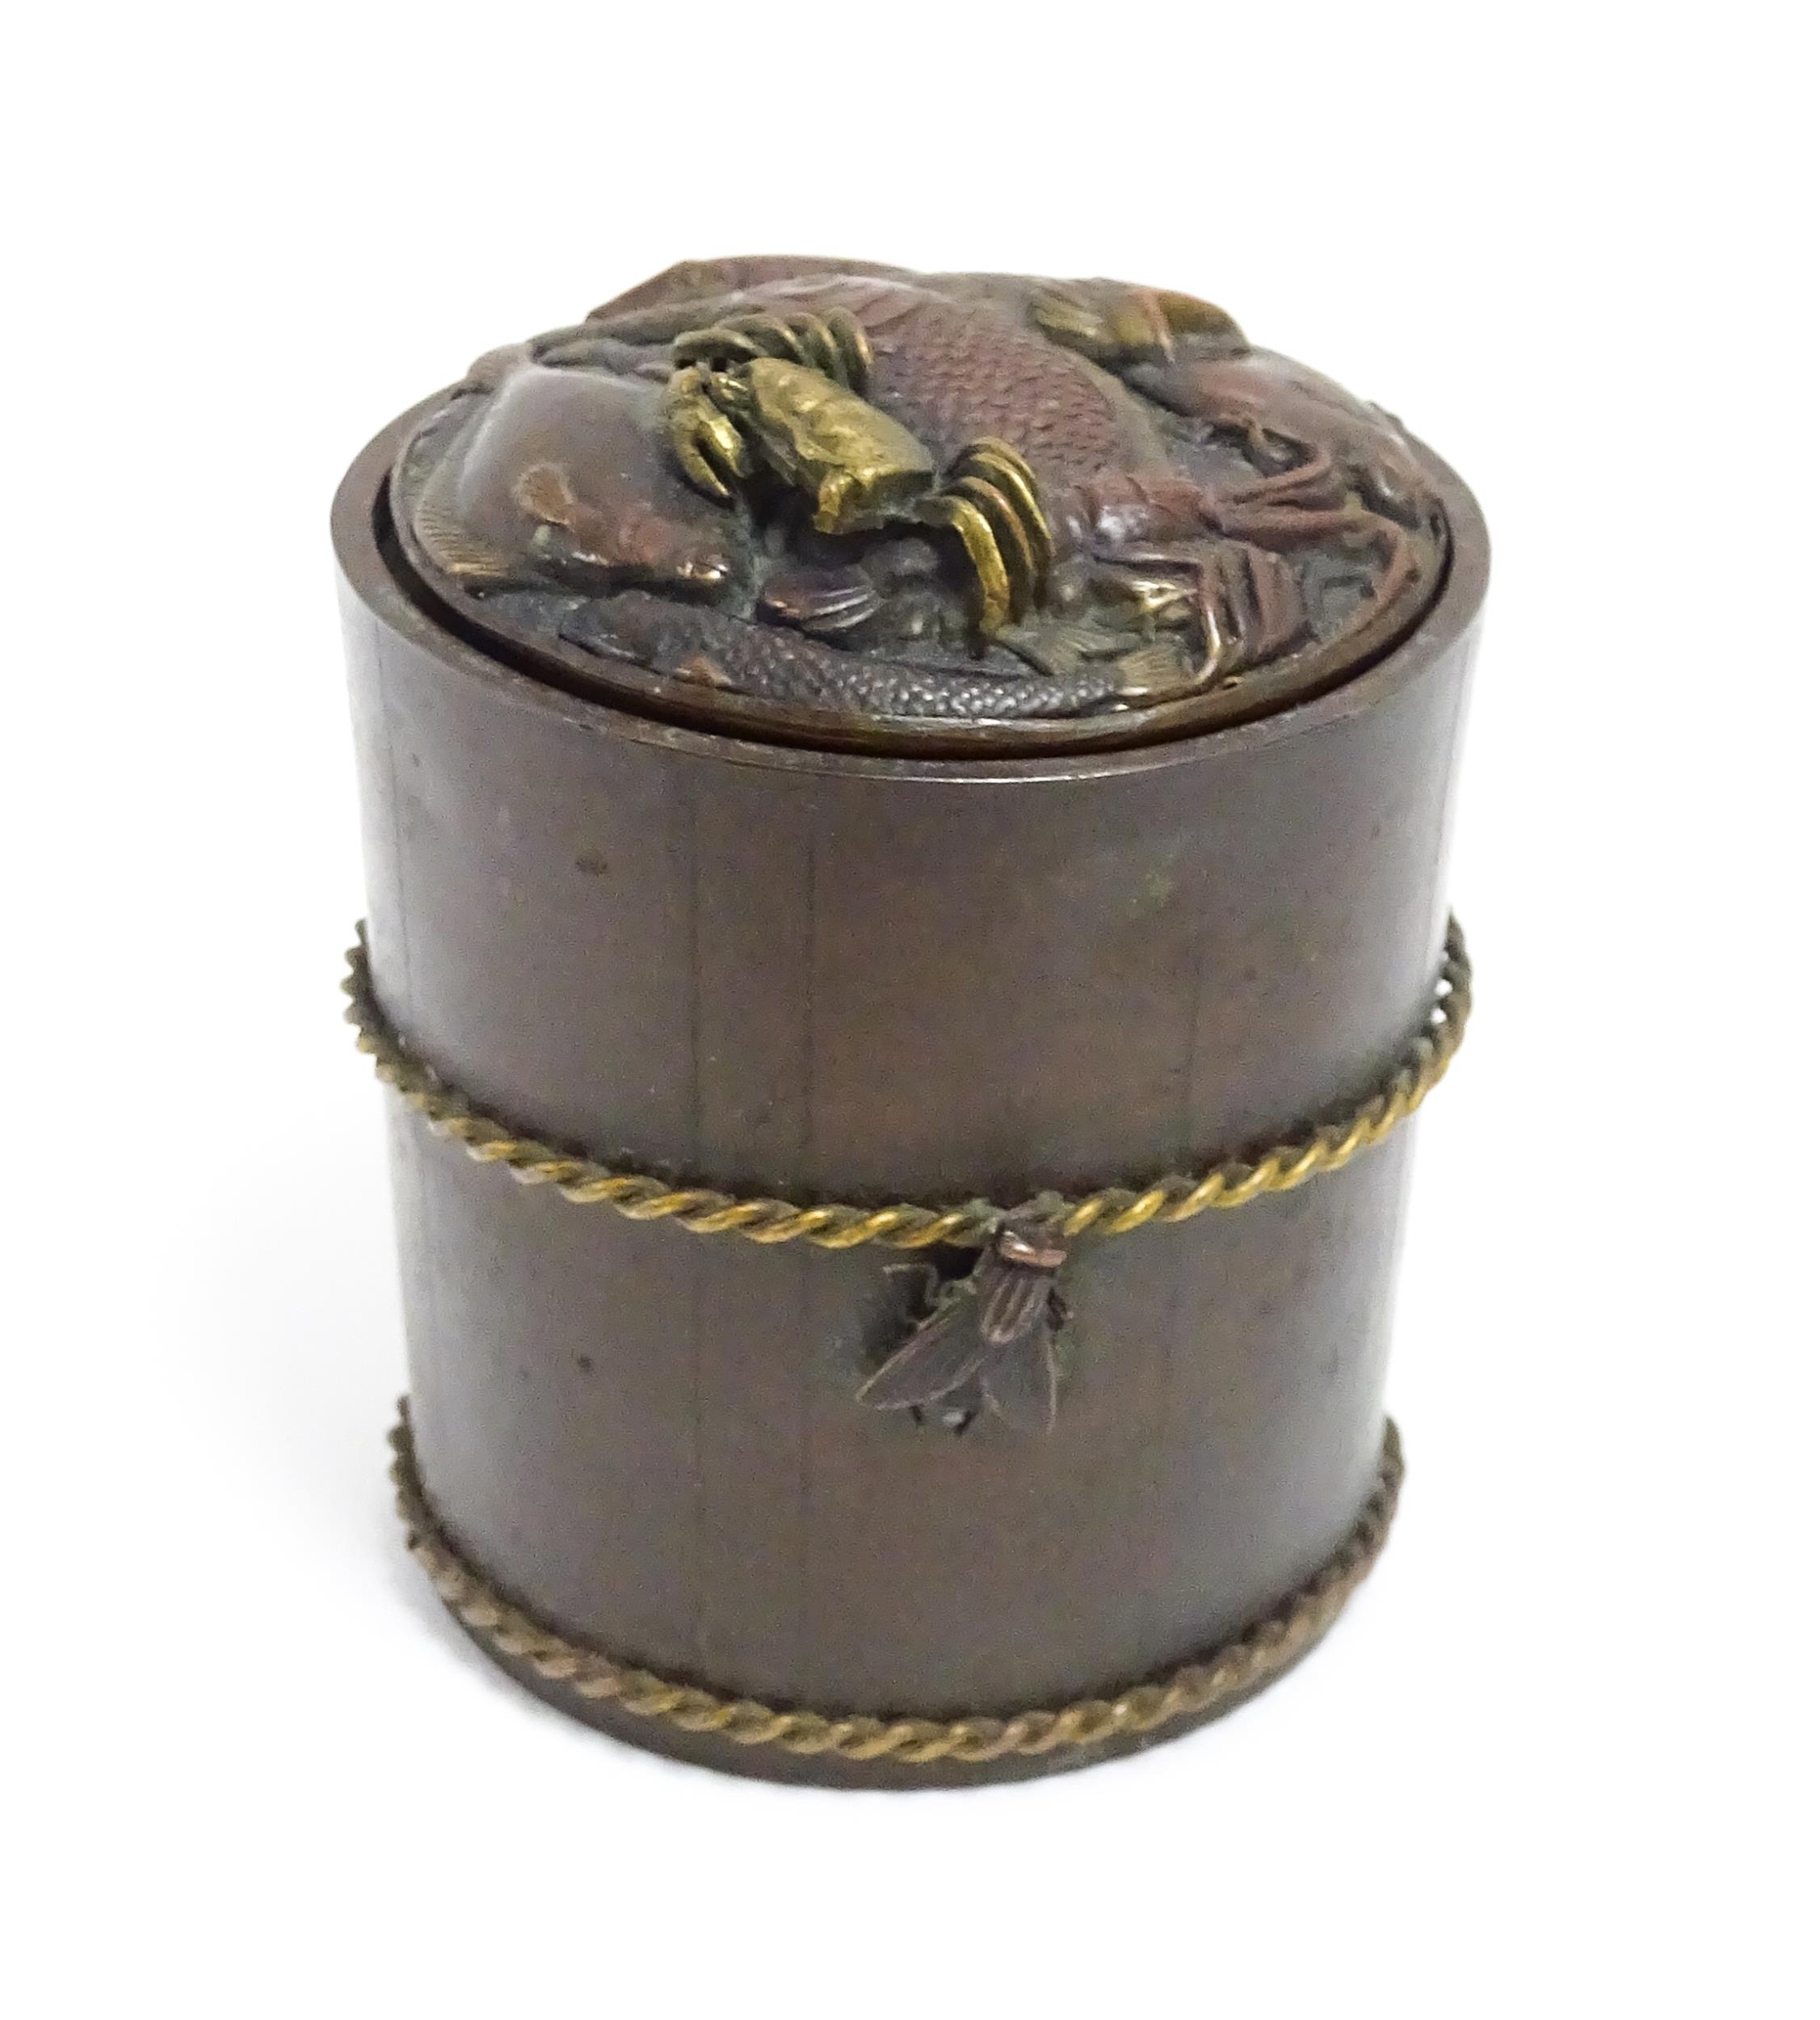 A Japanese bronze novelty inkwell of cylindrical form, the lid with fish and crab detail, the body